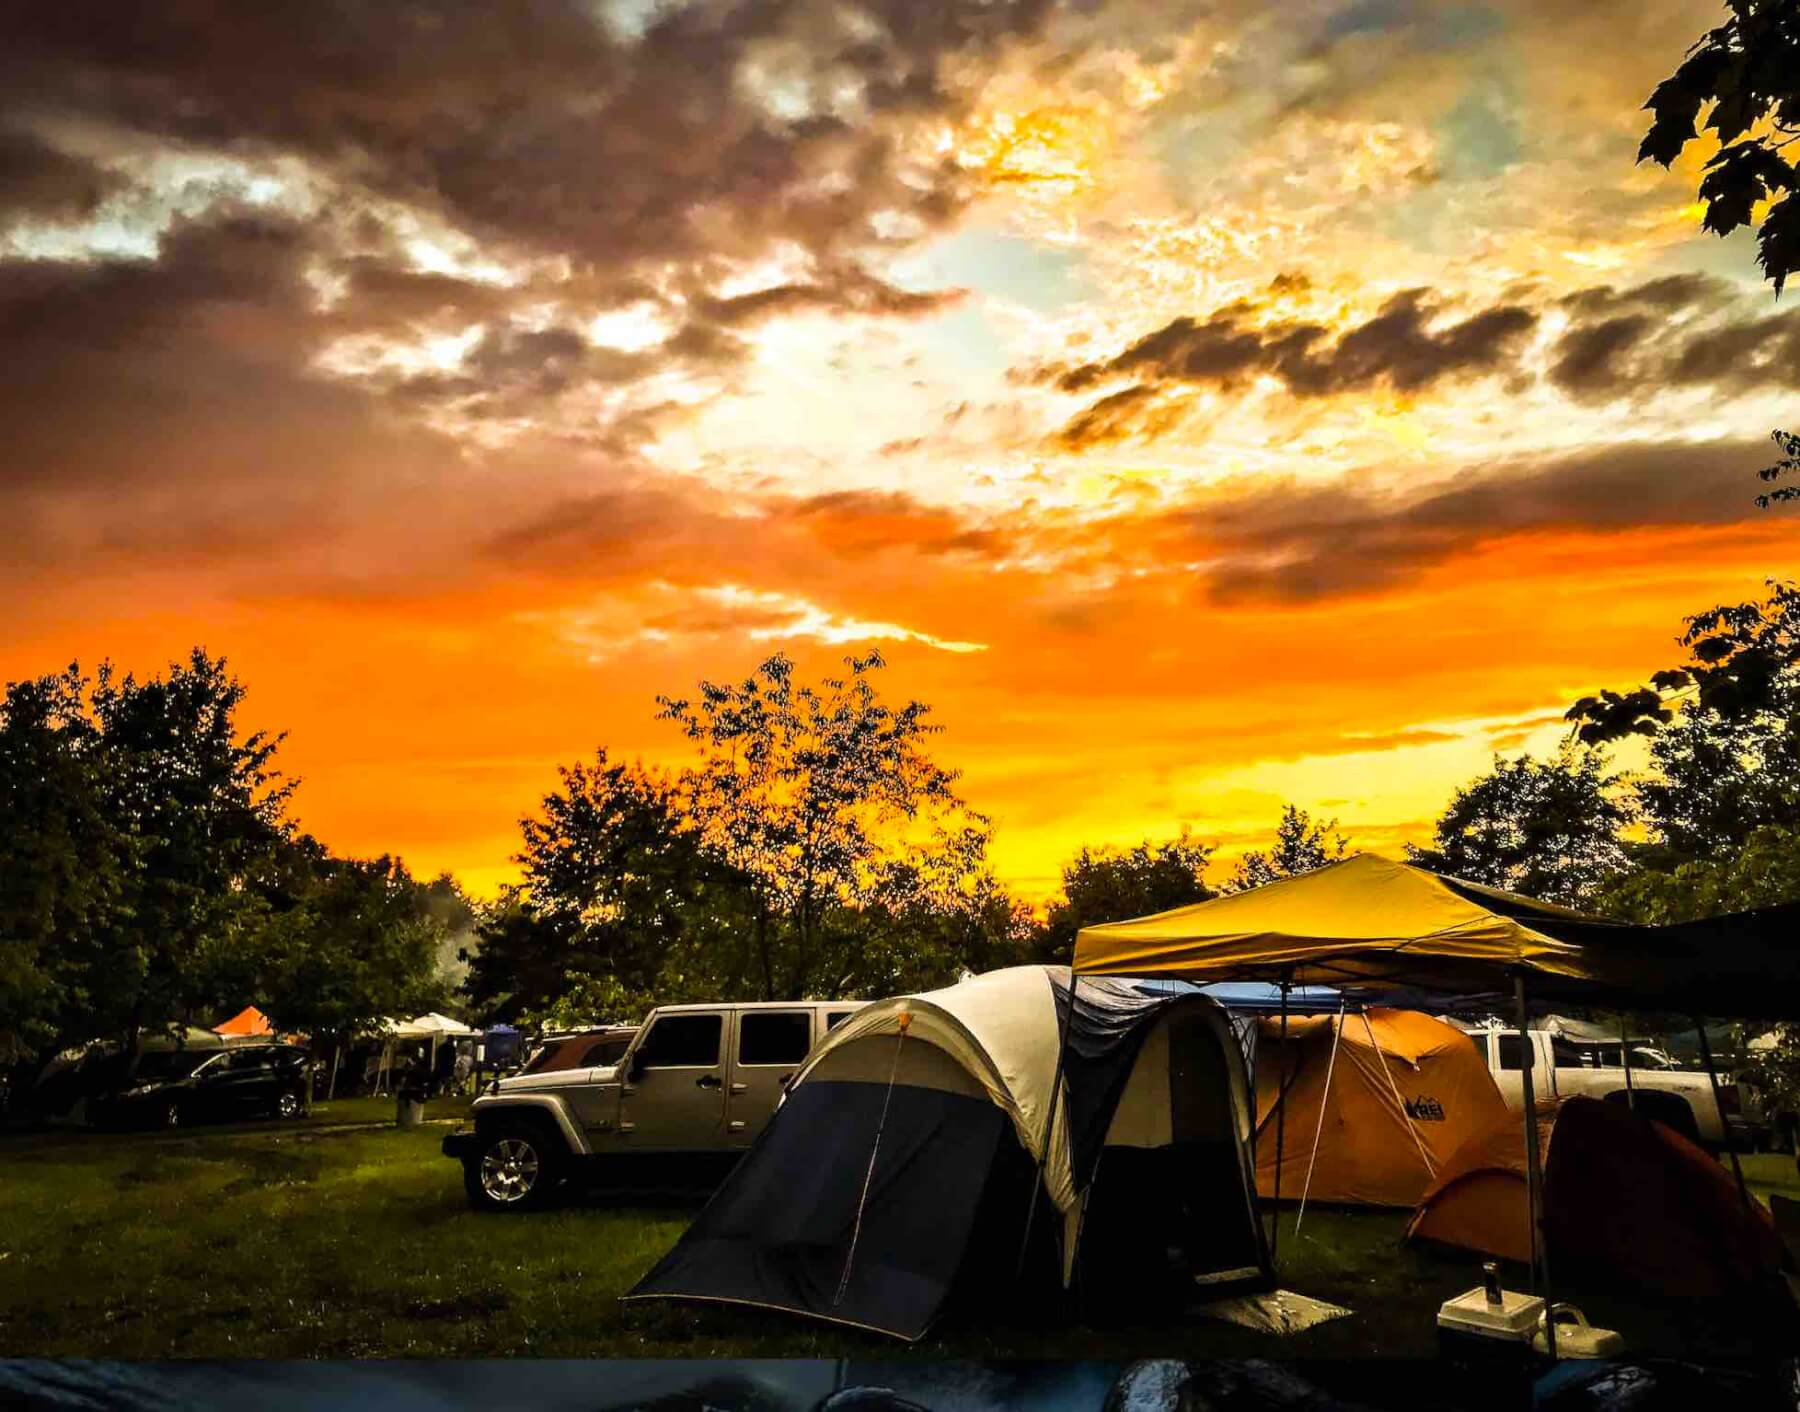 mountiantop campground at sunset at ace adventure resort during mountain music festival